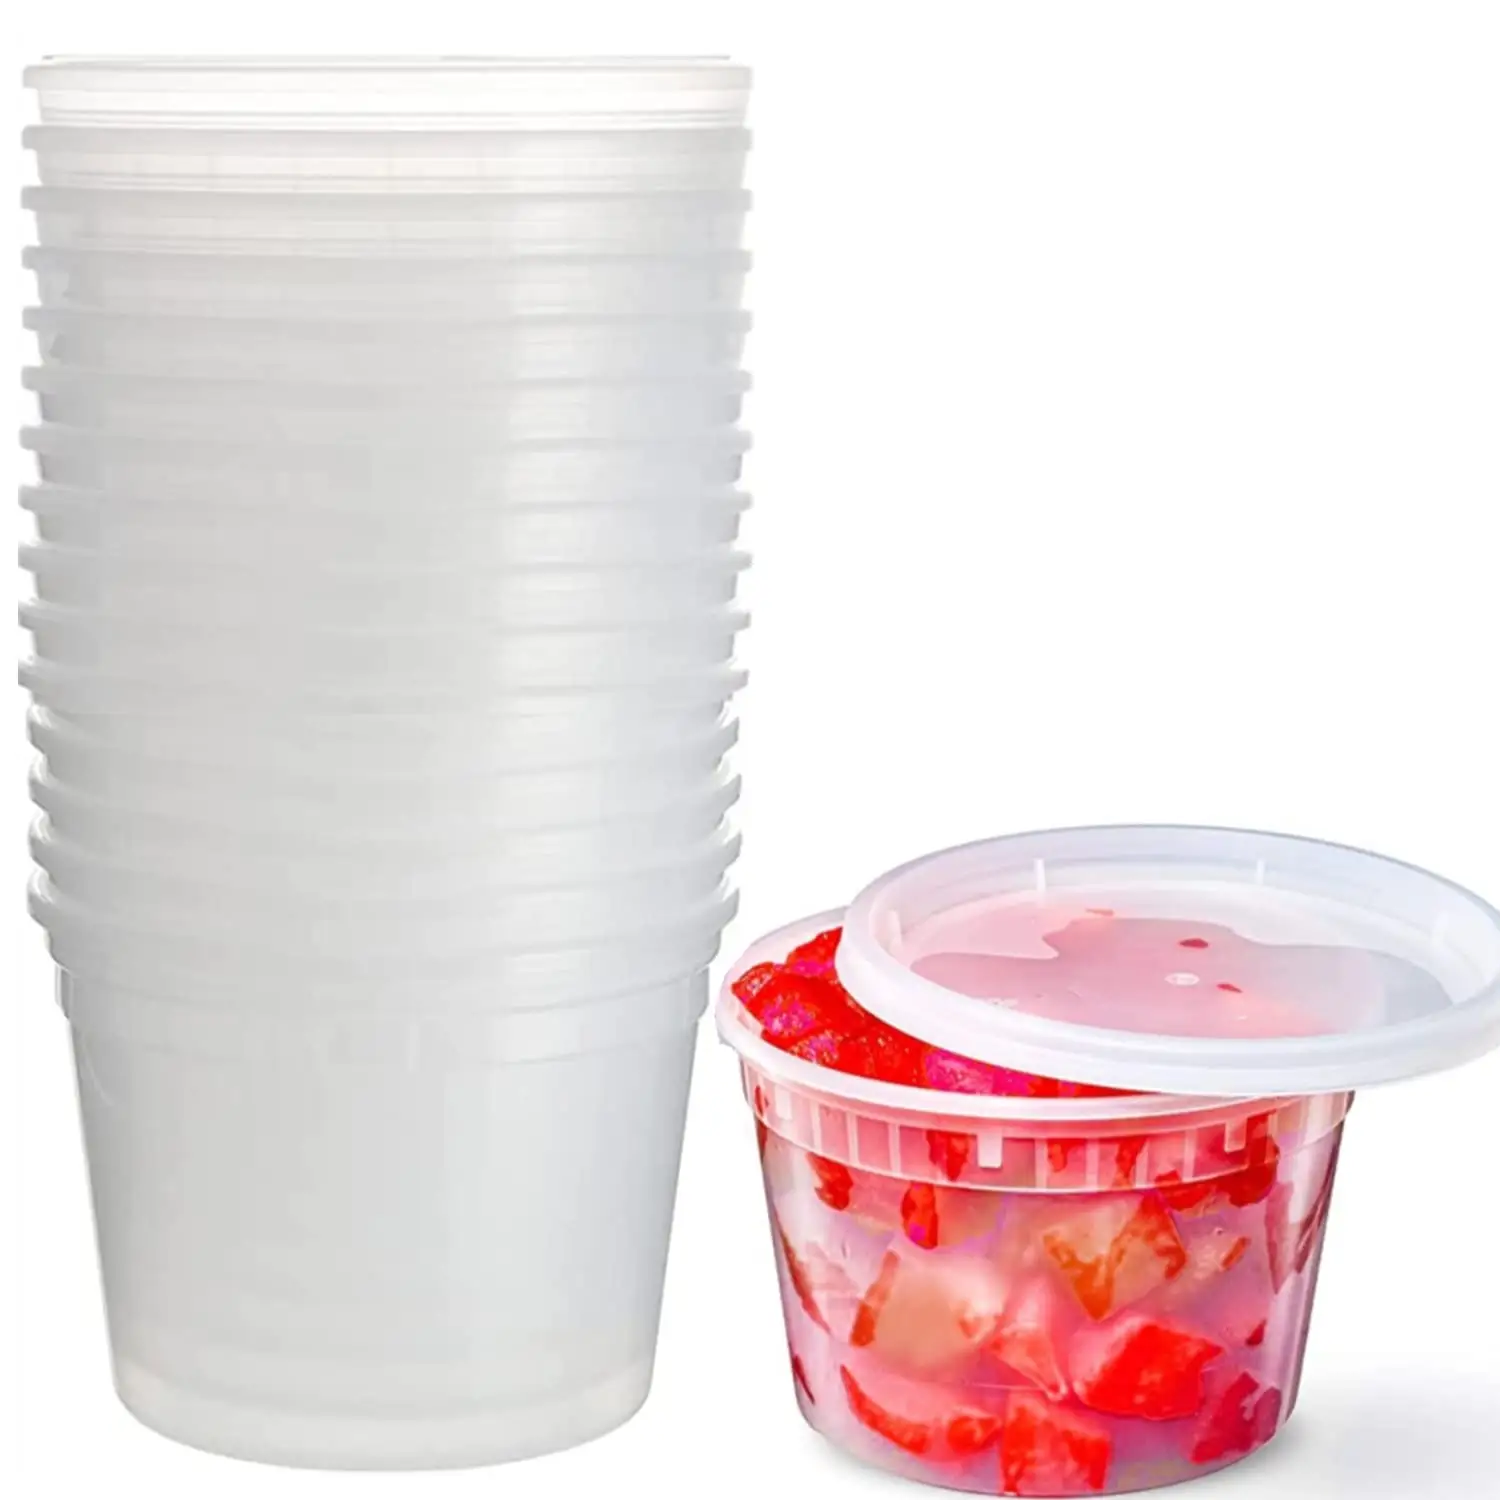 12 OZ Plastic Deli Containers with Airtight Lids Reusable Food Storage Container for Soups